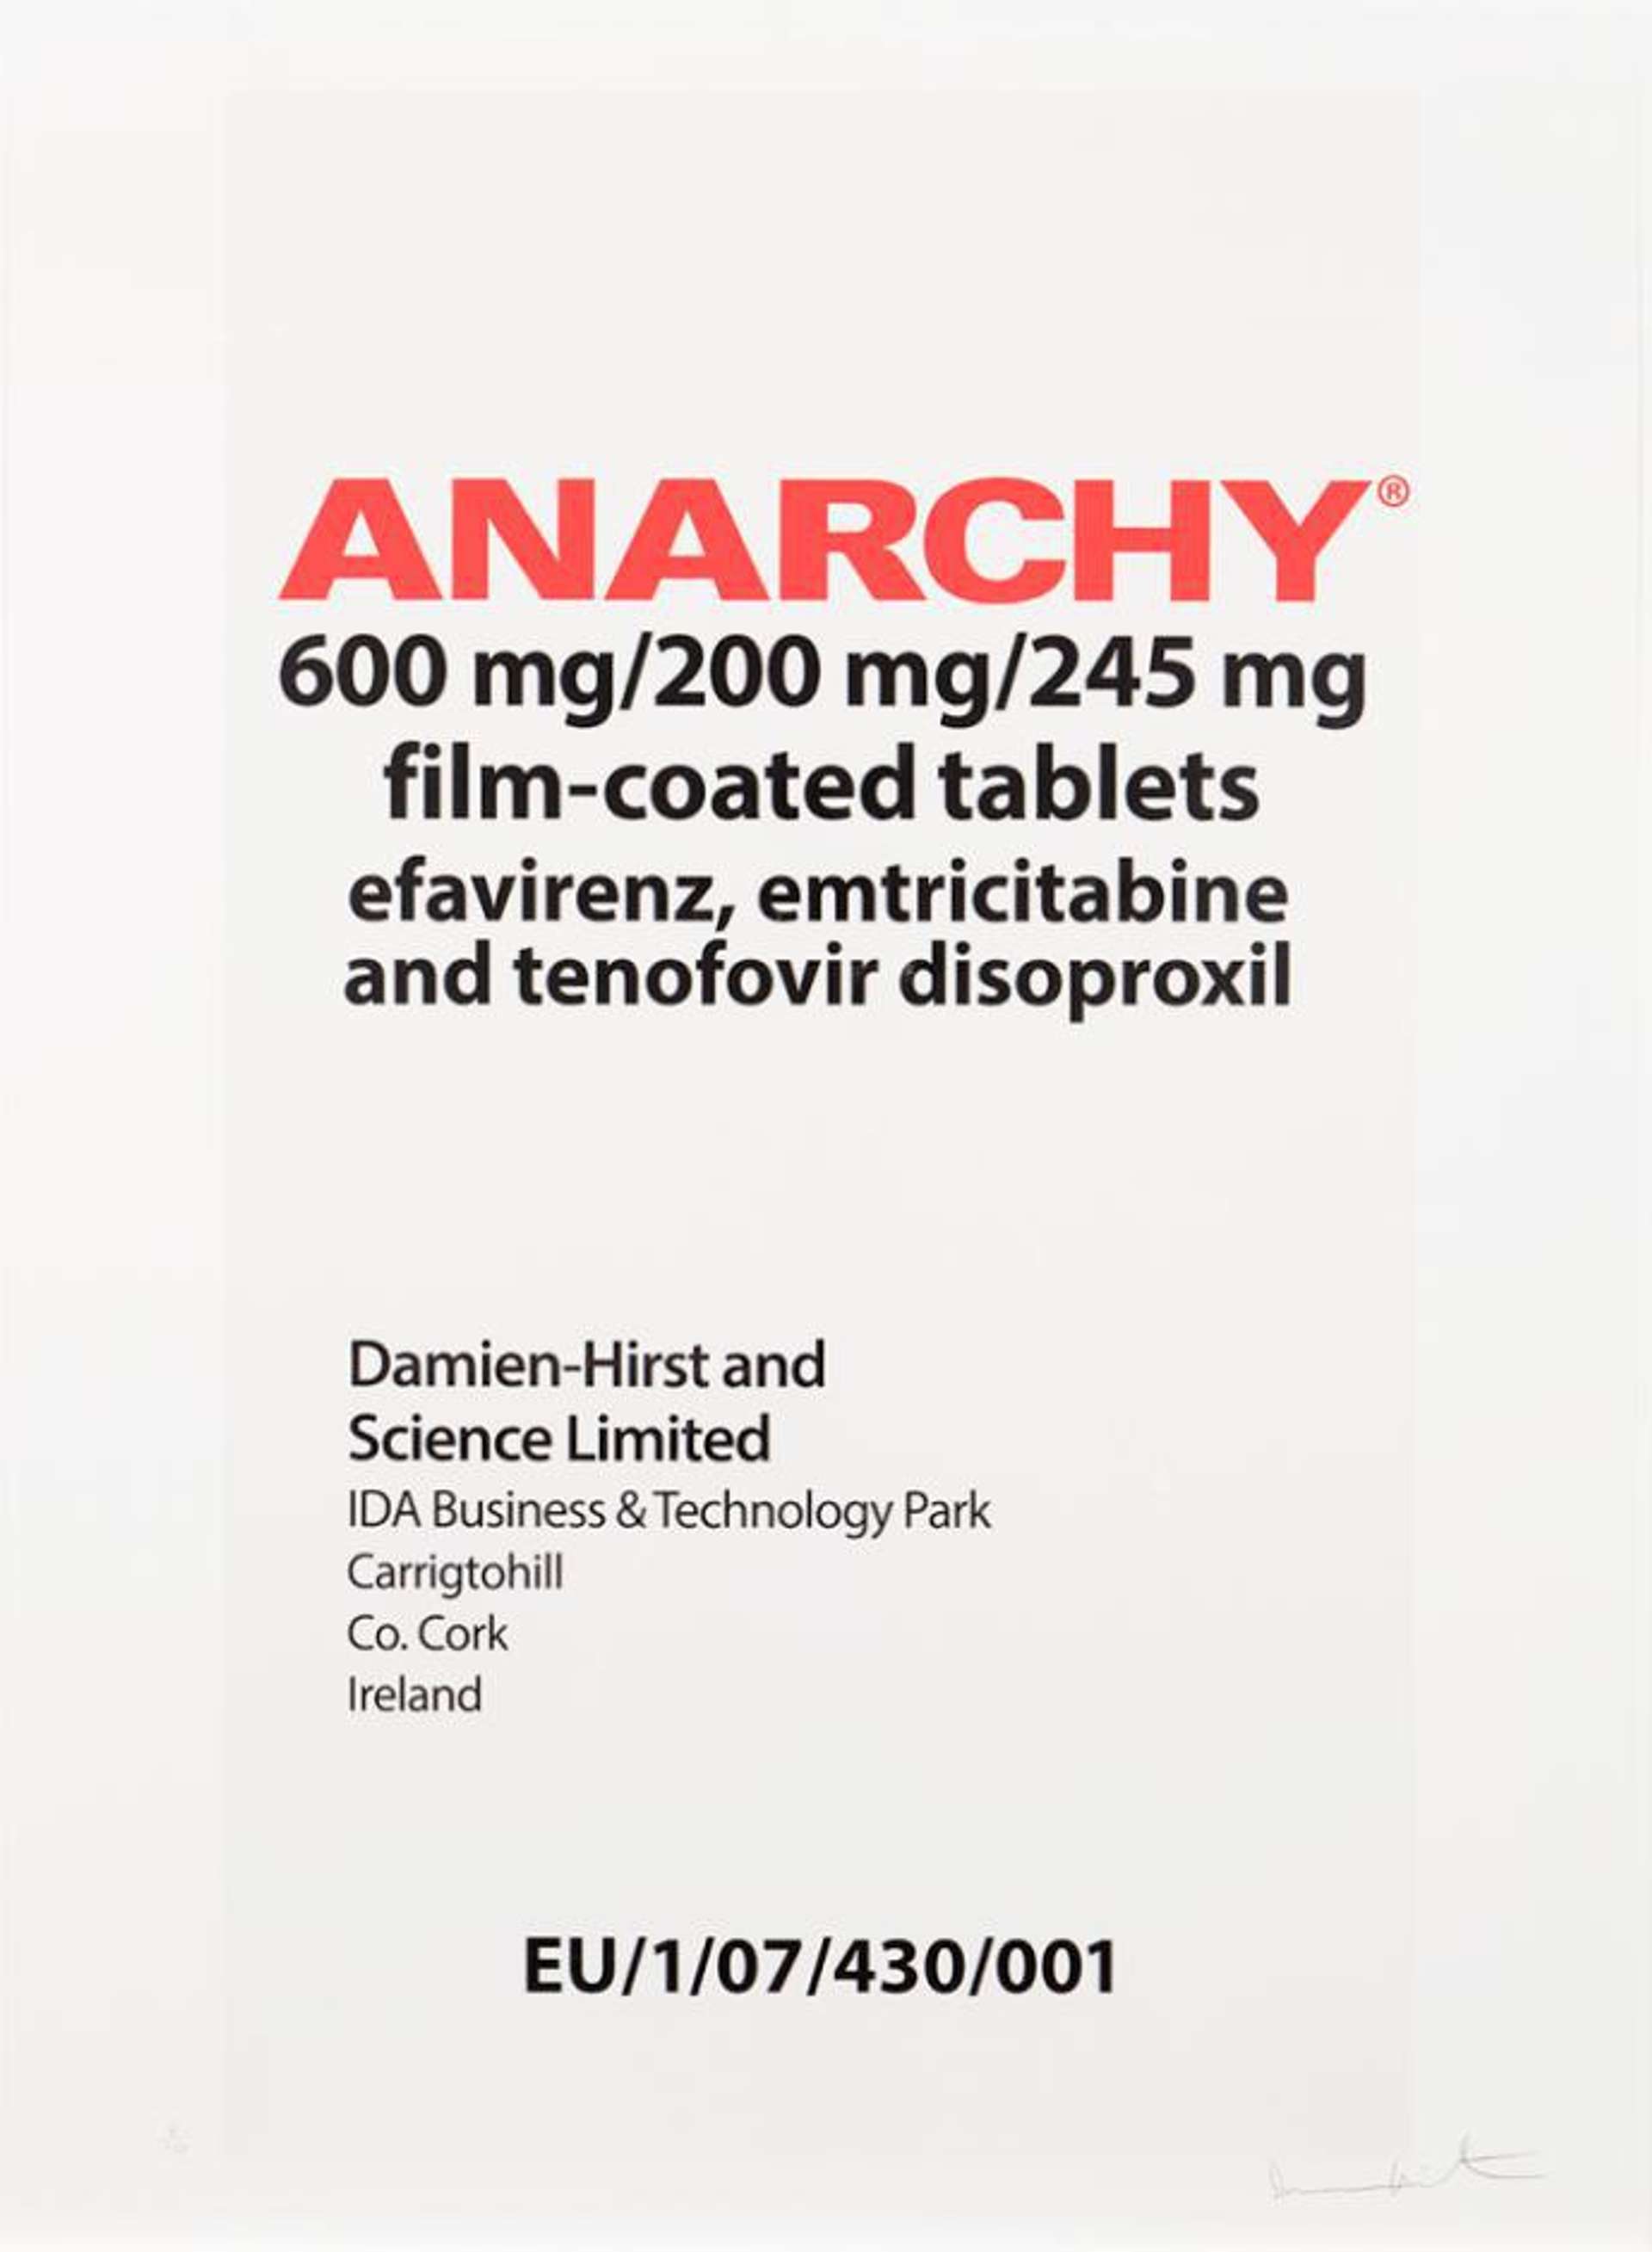 Damien Hirst’s Anarchy. A screenprint of a white pharmaceutical box with various texts including “anarchy ® 600 mg."